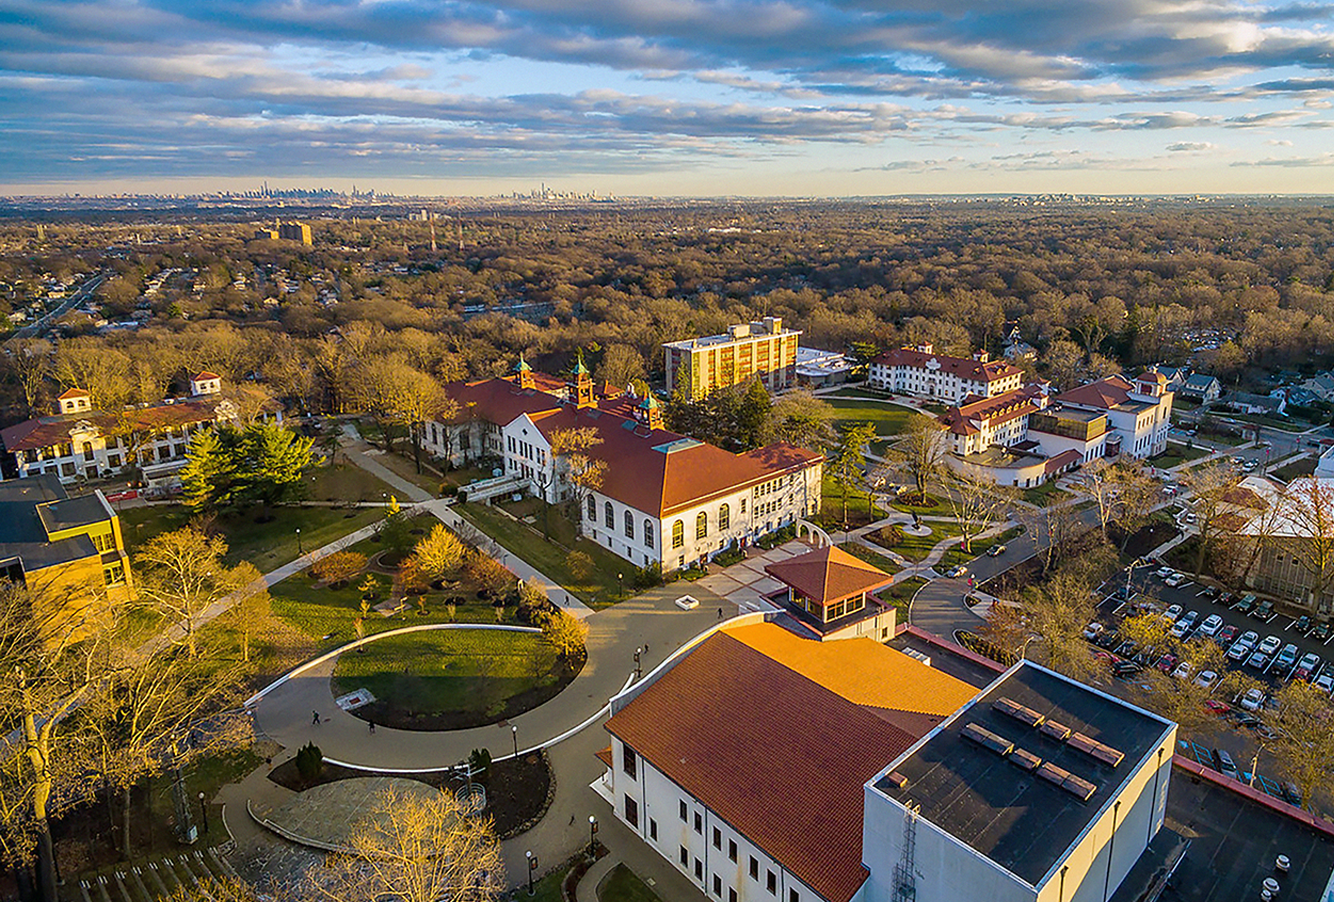 Commercial, Campus, and Community Microgrids